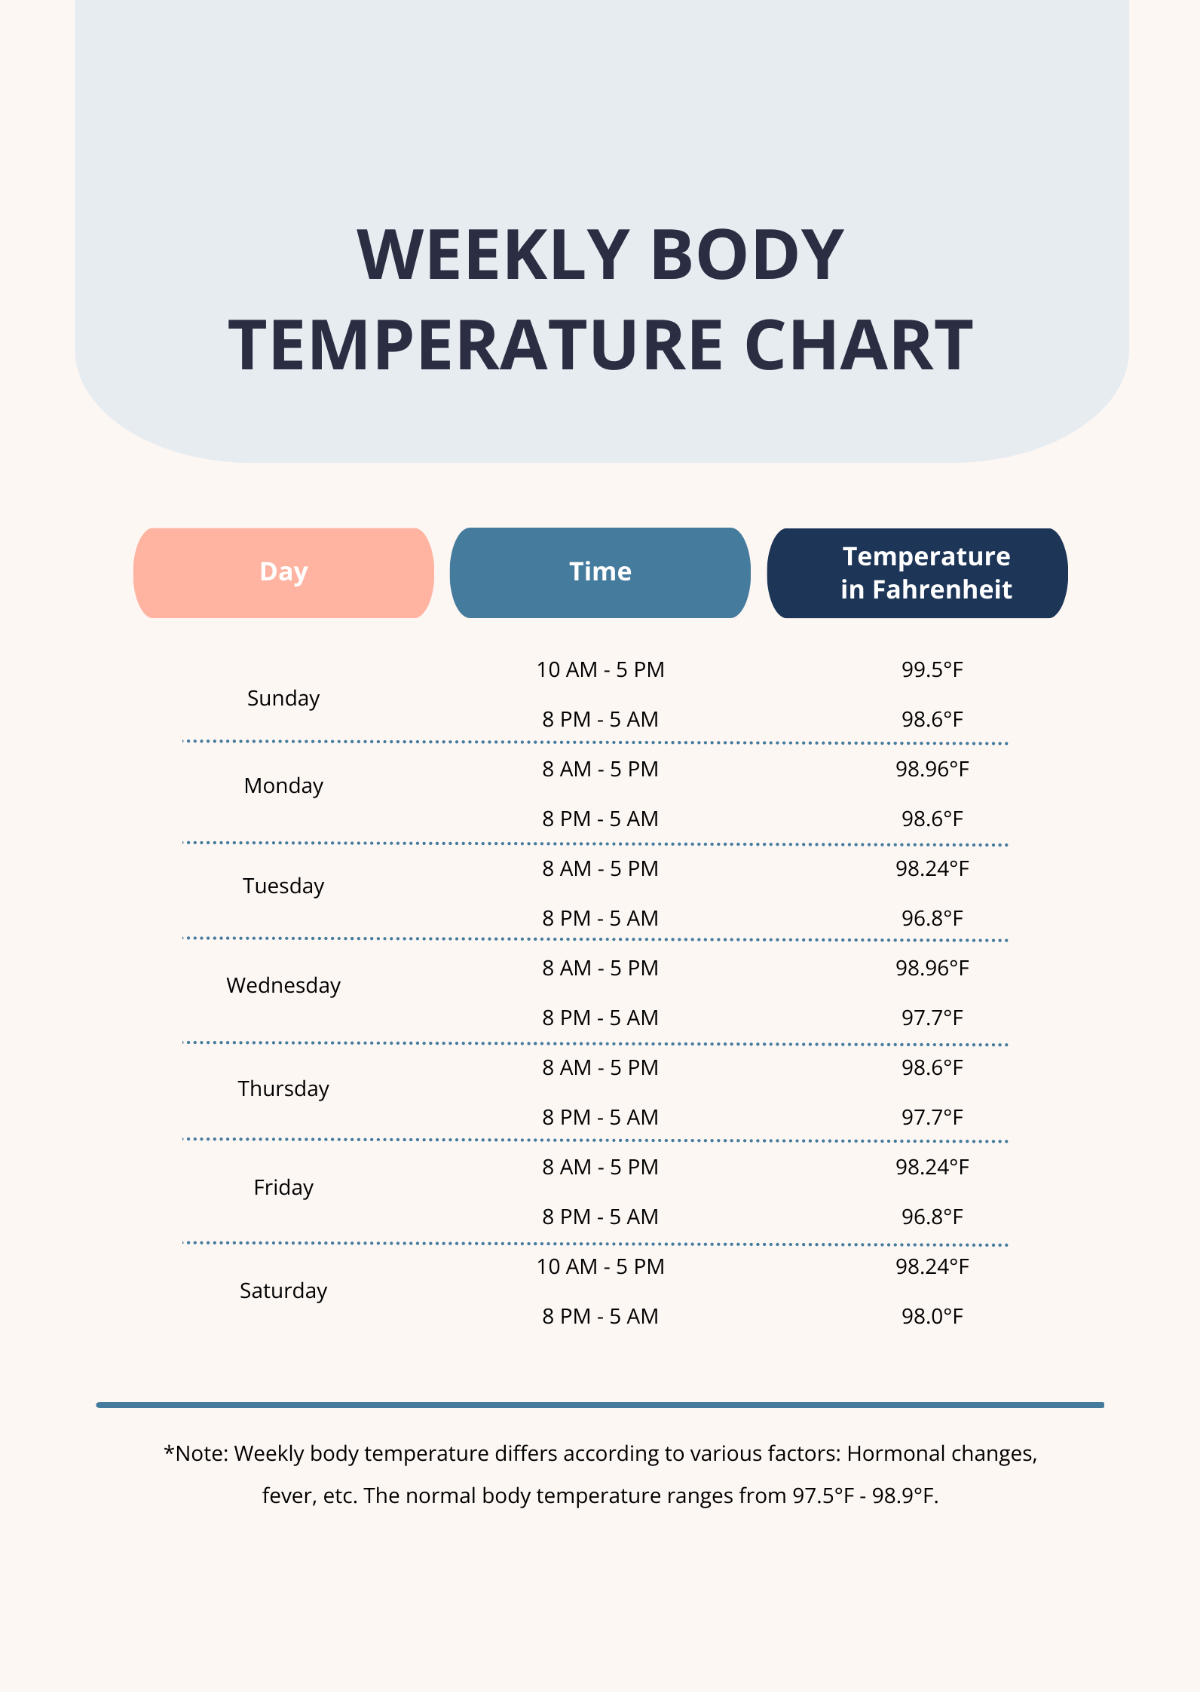 FREE Body Temperature Chart Templates & Examples - Edit Online & Download